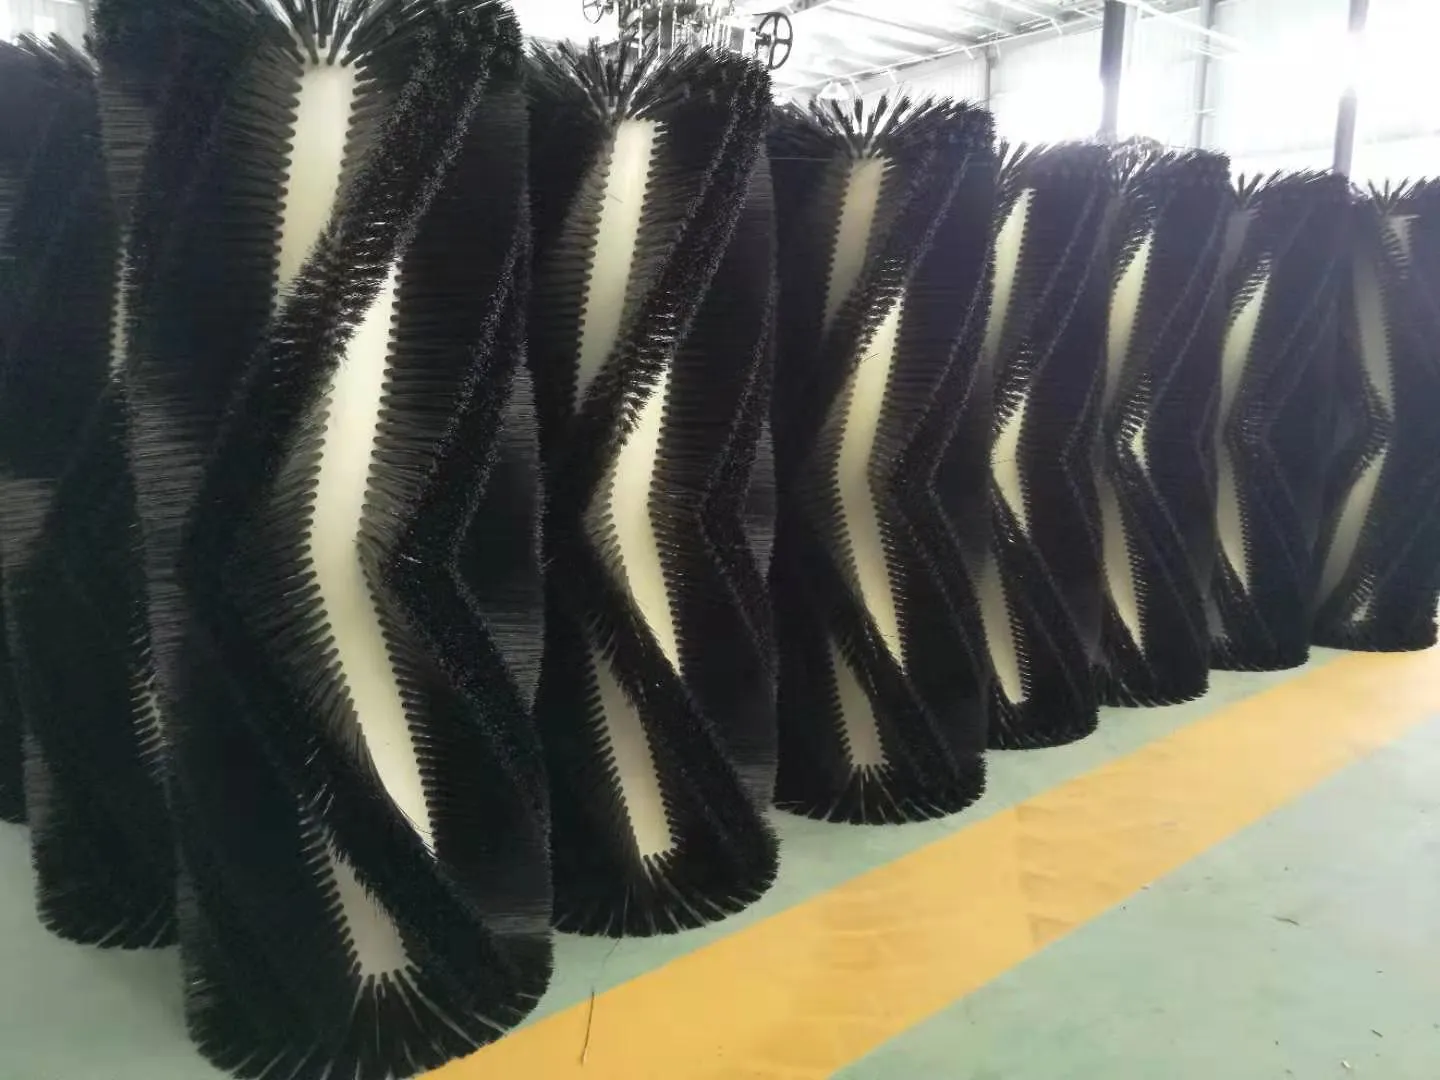 Main Brooms For Road Sweeper In the Factory